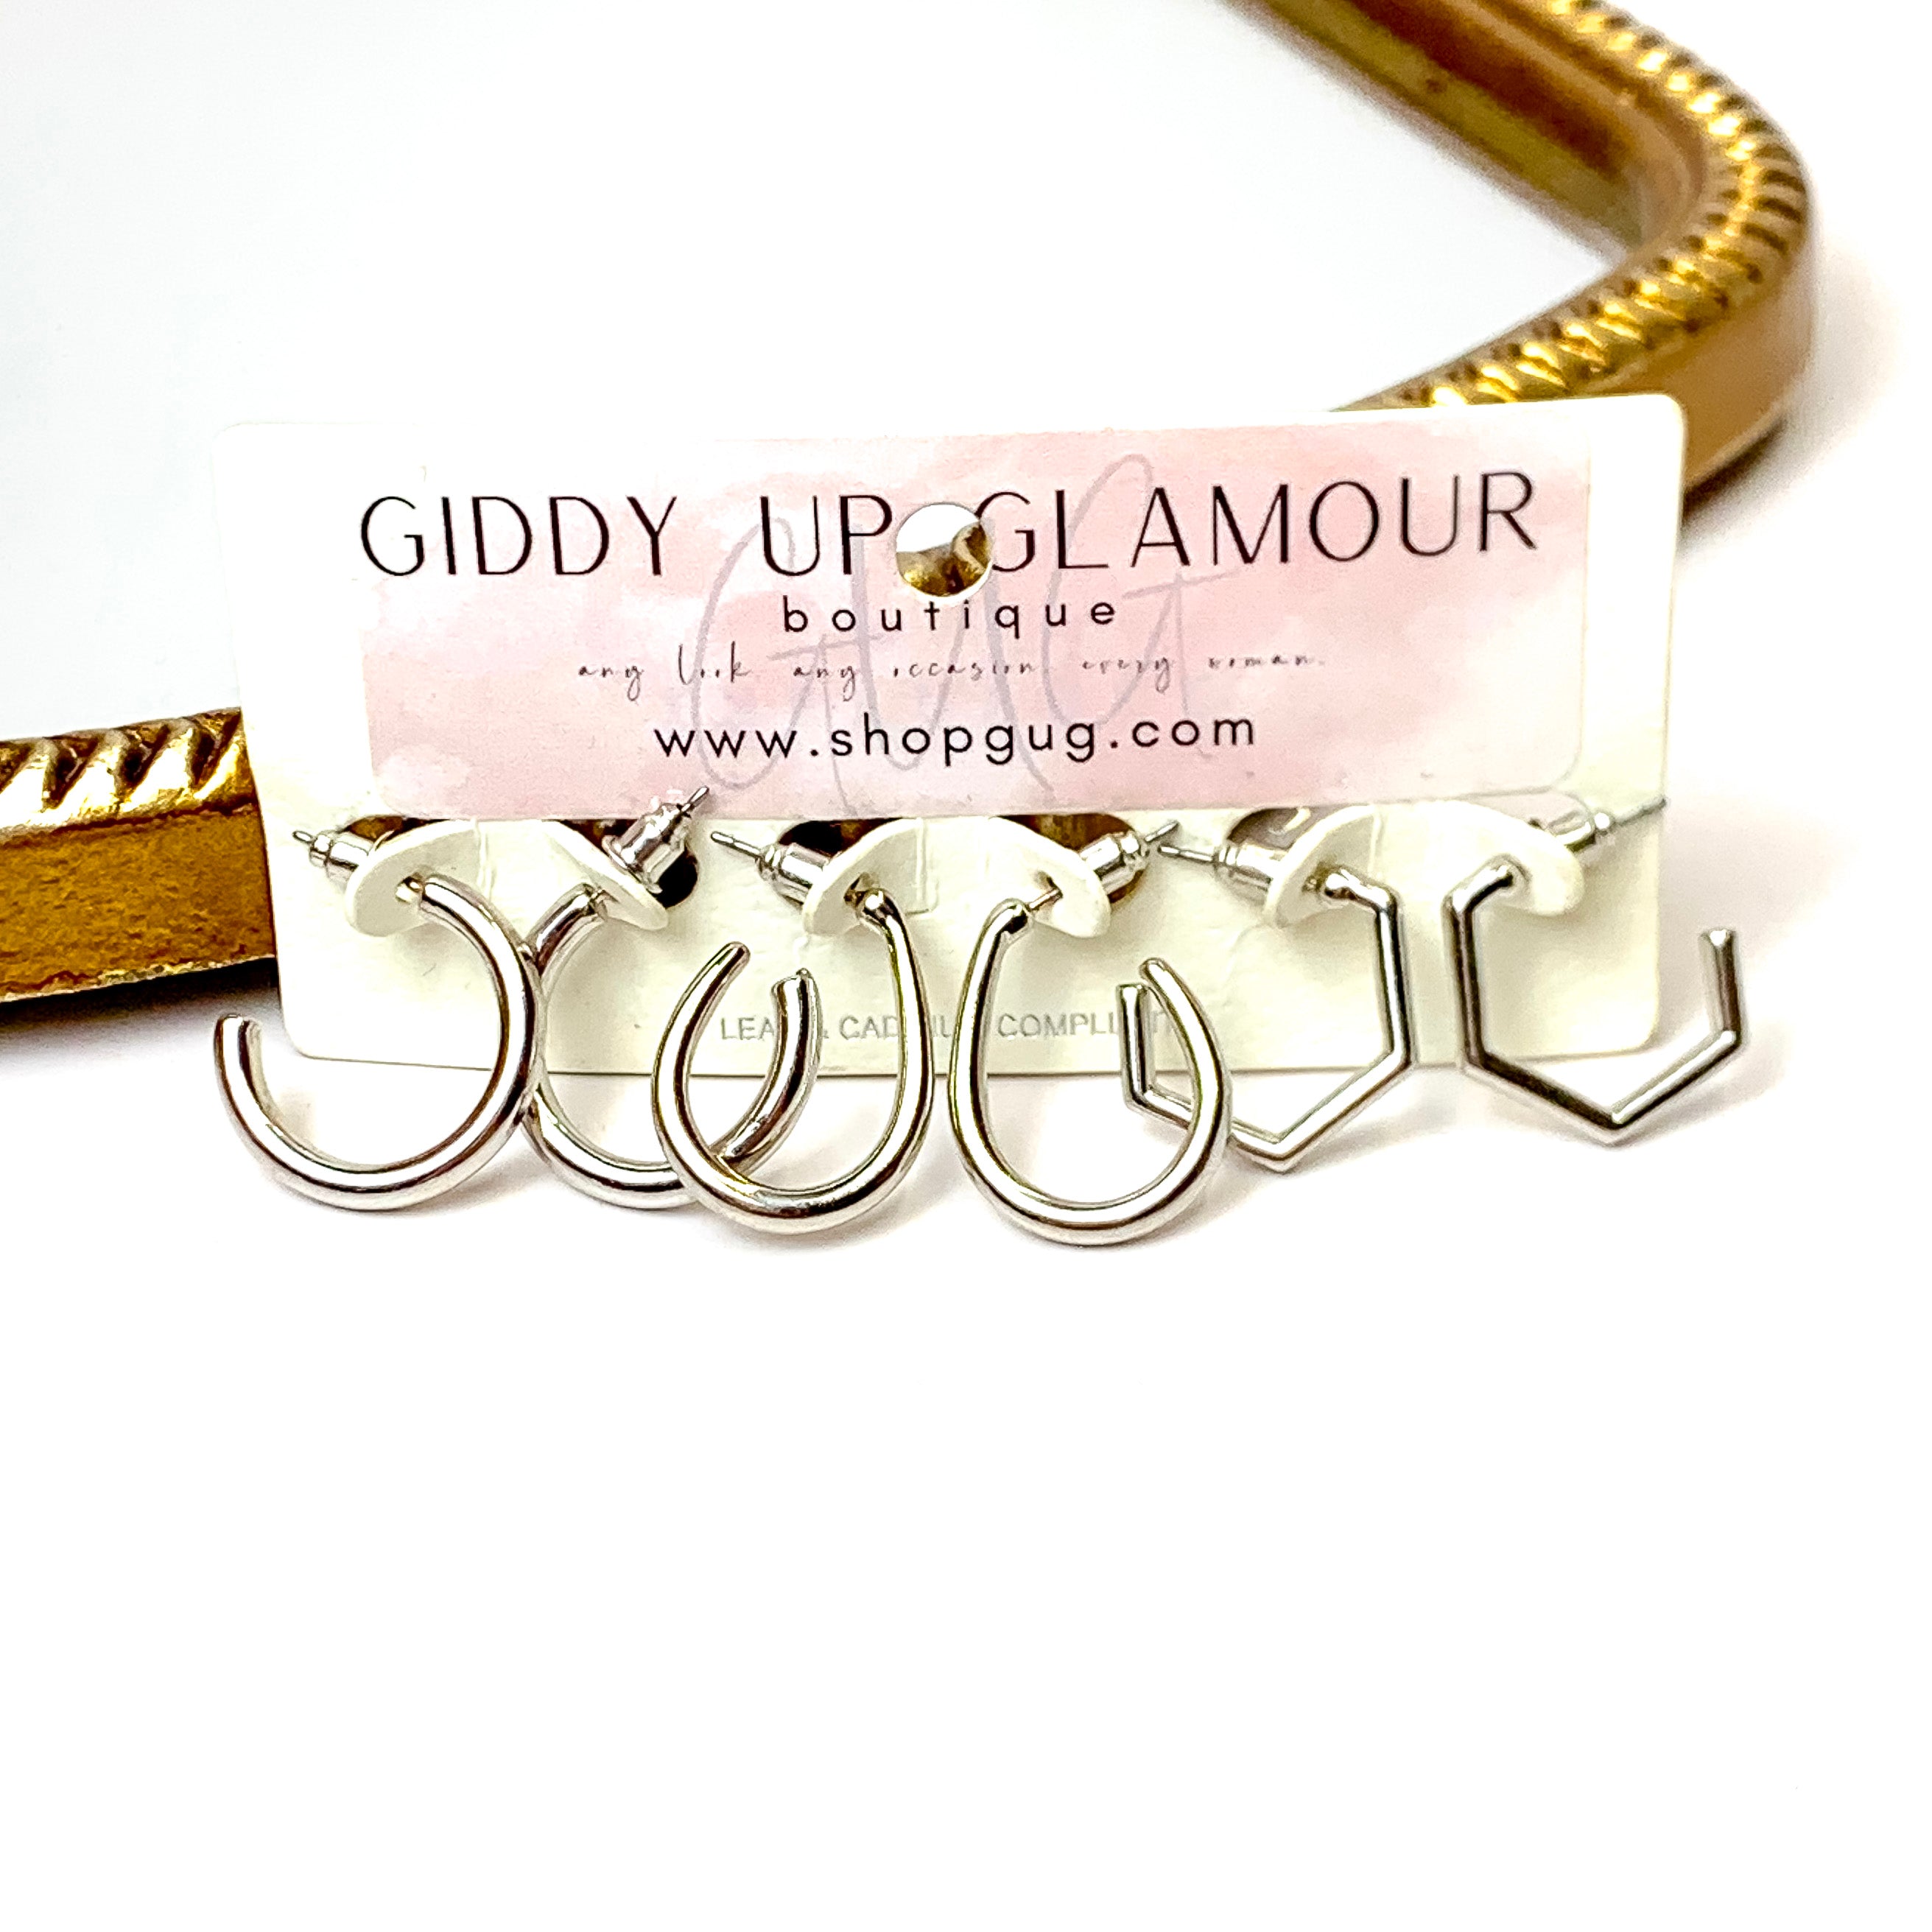 Trio Hoop Earring Set in Silver Tone - Giddy Up Glamour Boutique